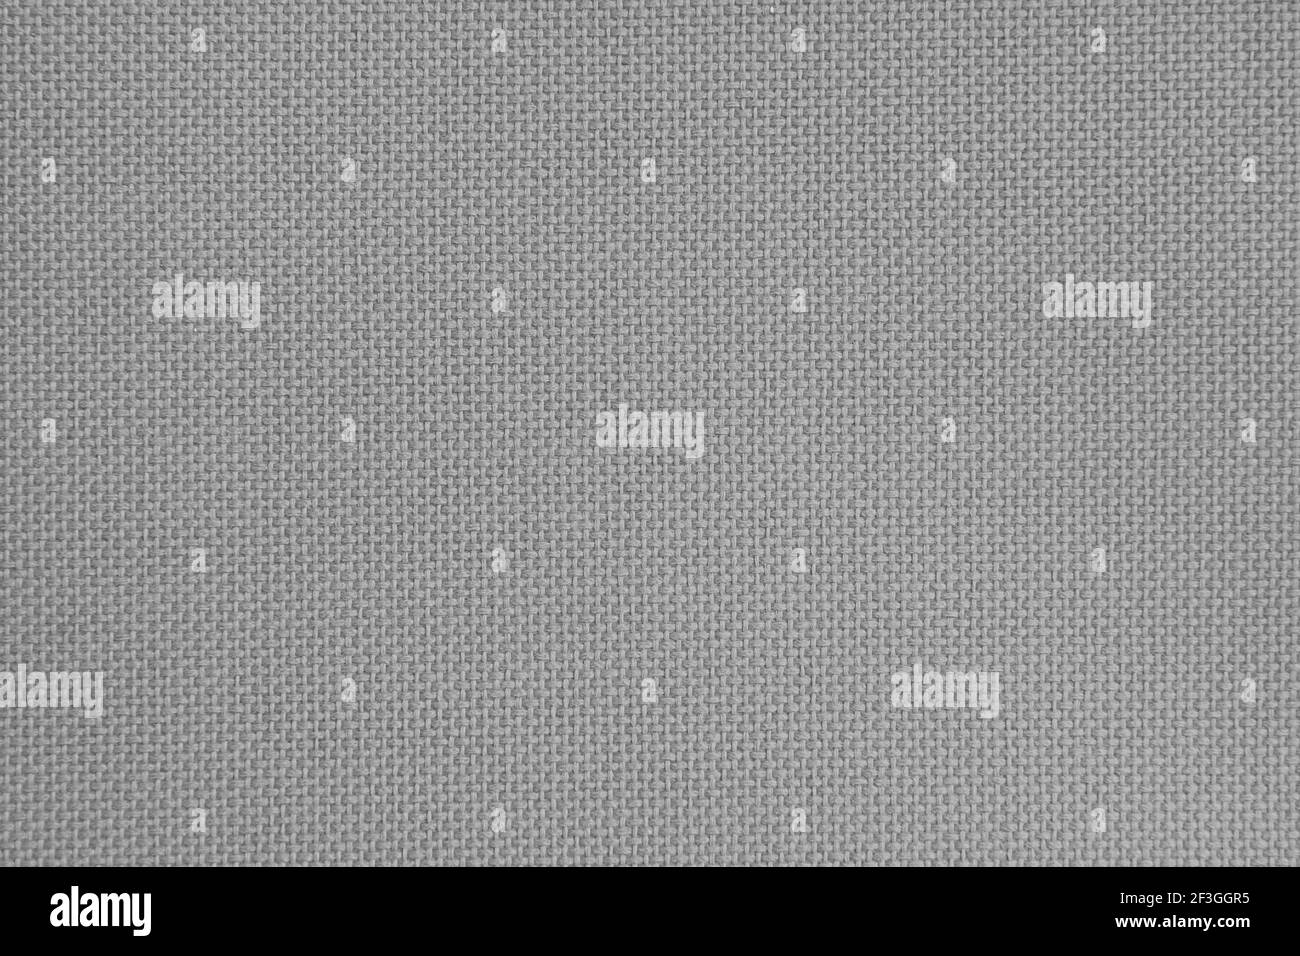 Gray fabric texture as background Stock Photo